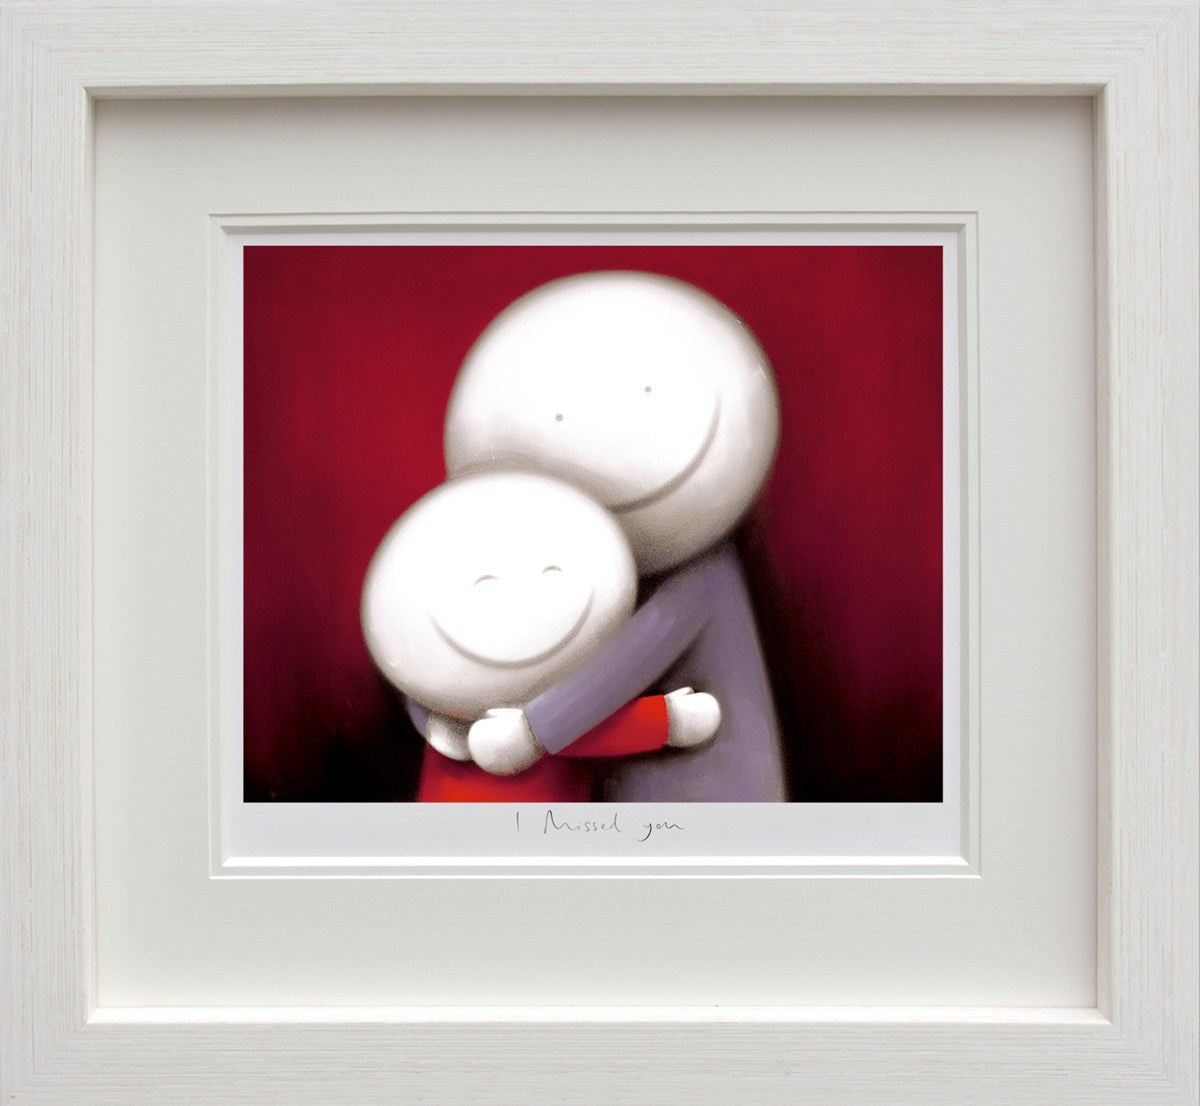 I Missed You by Doug Hyde